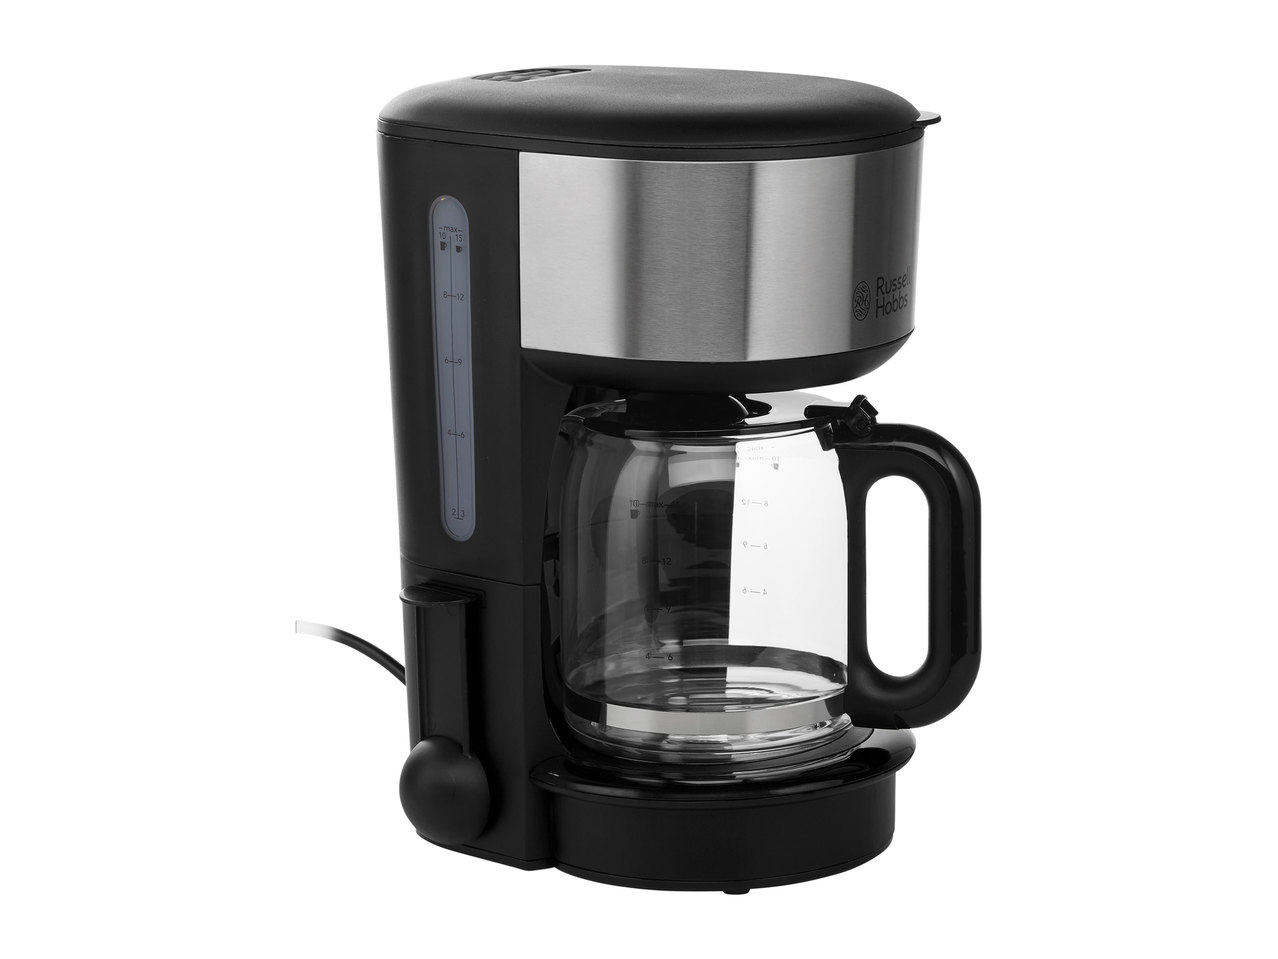 Russell Hobbs Oxford Coffee Maker1